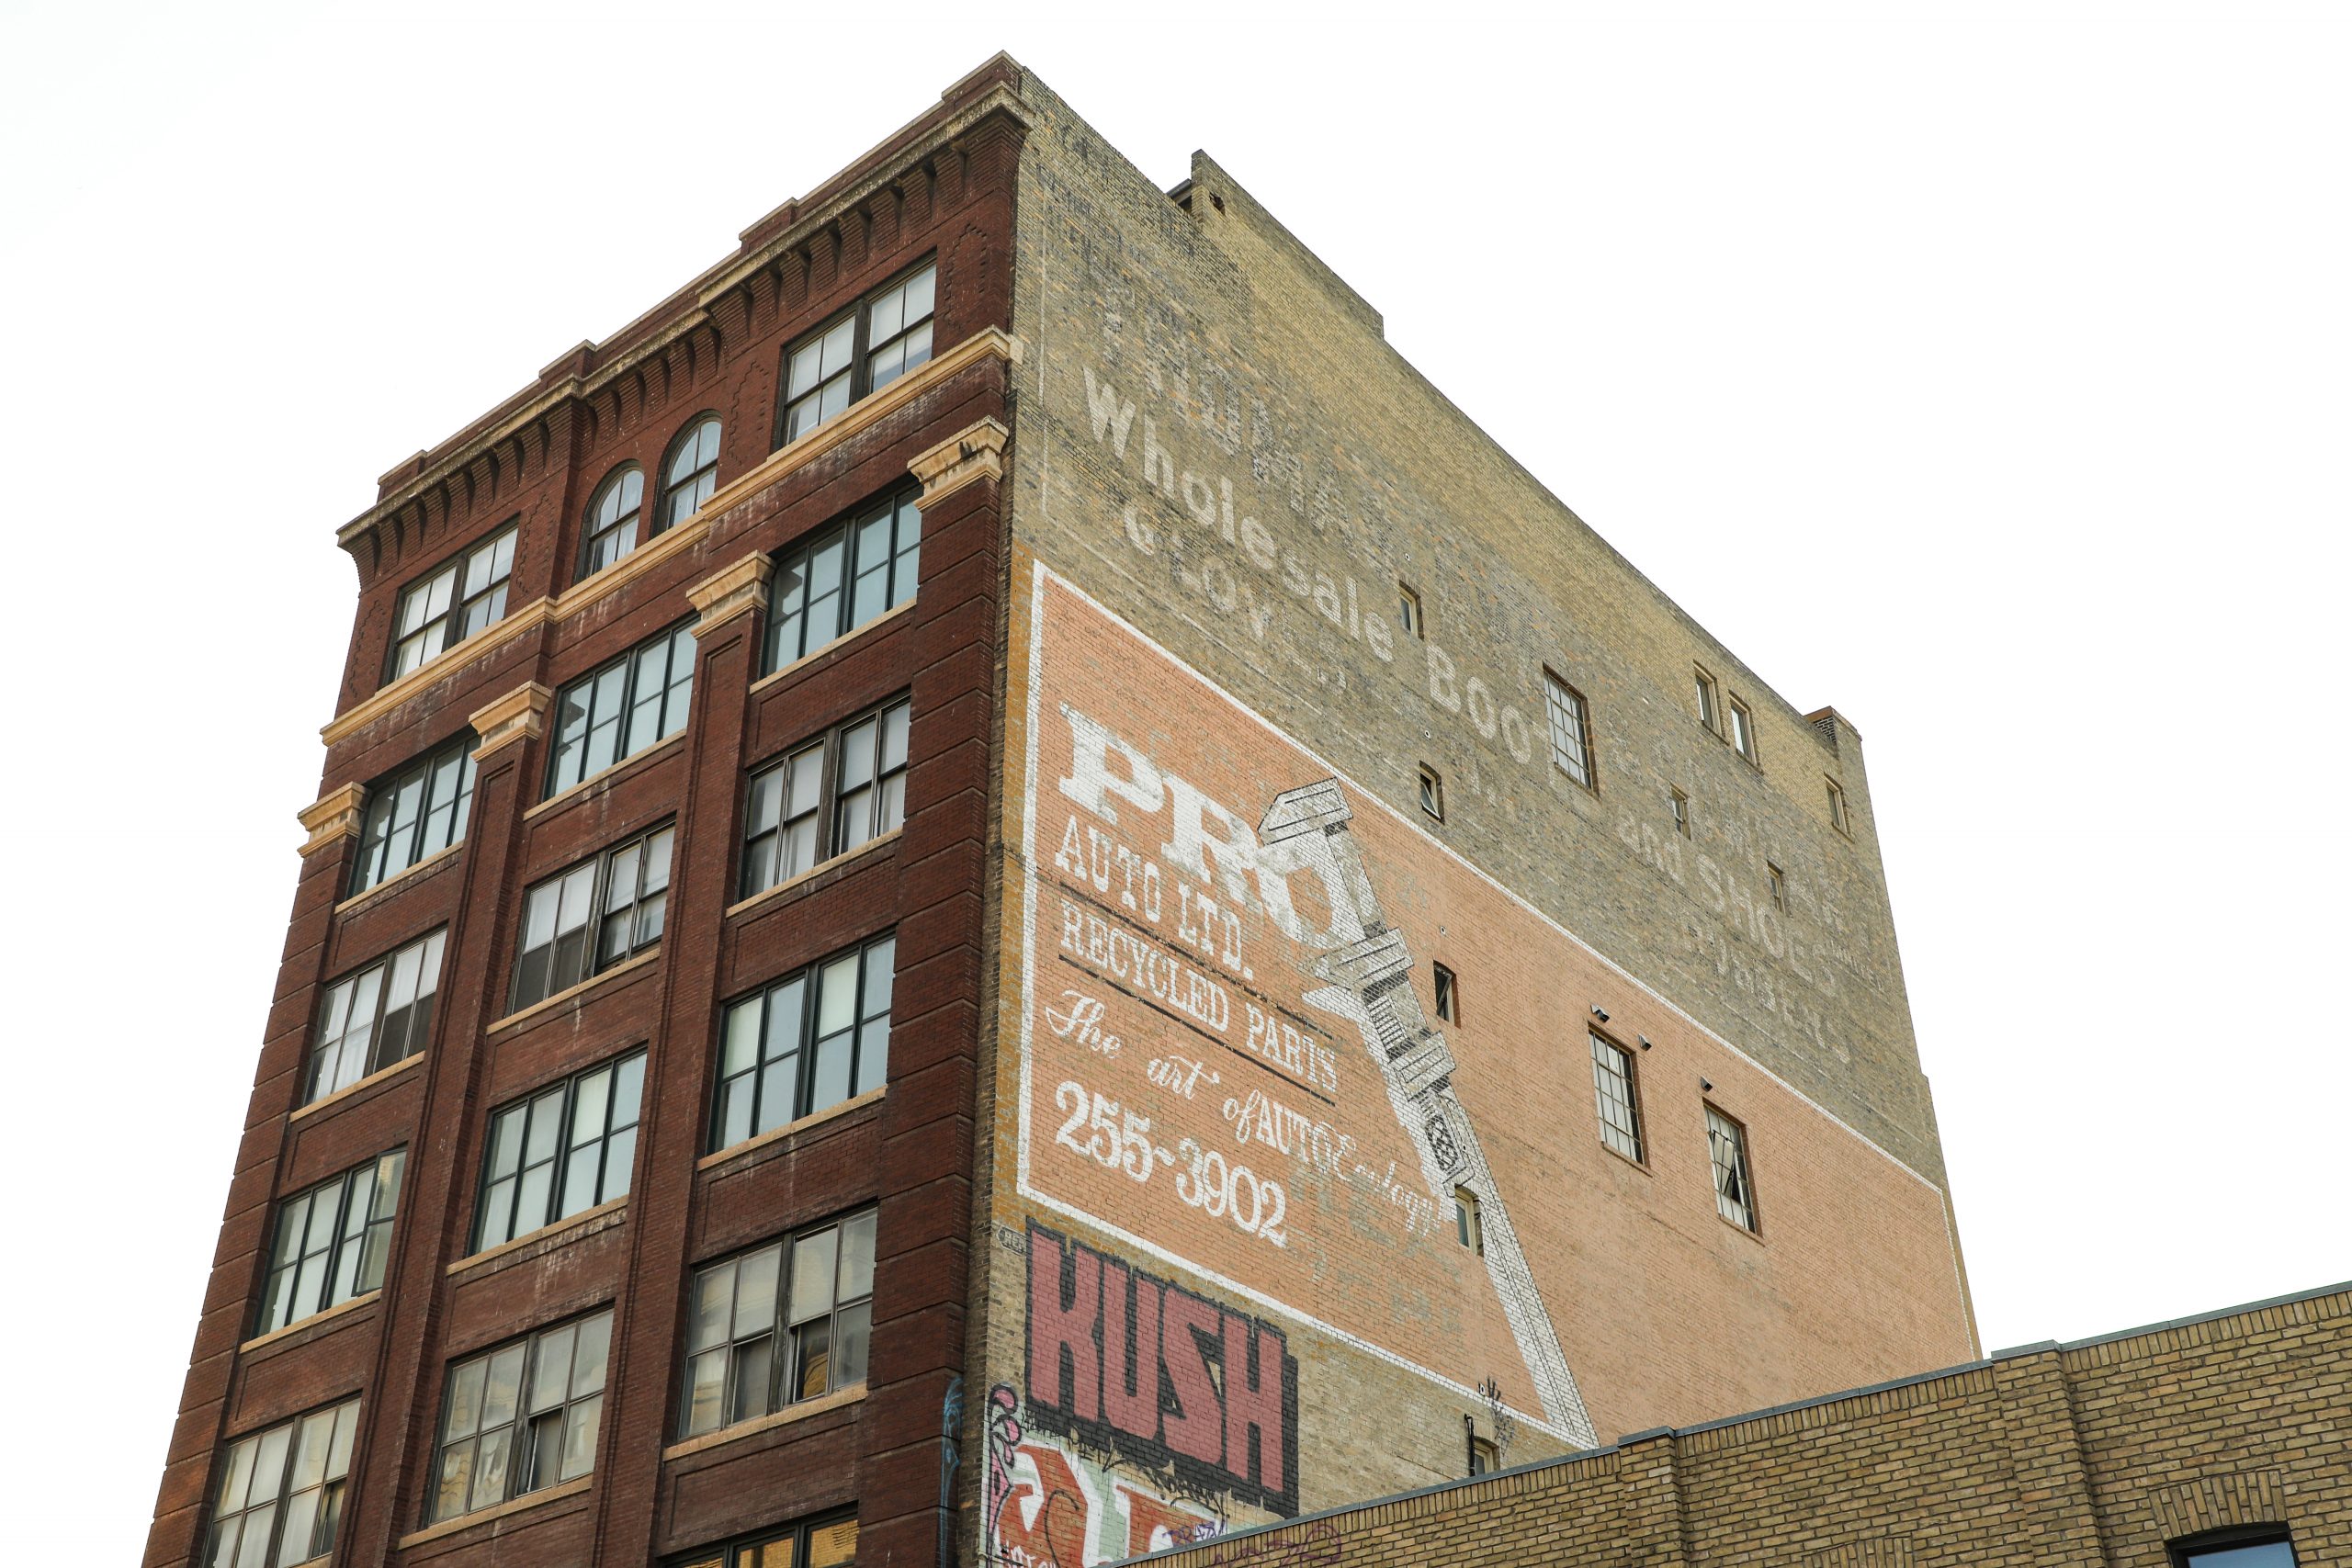 Image of Ghost Signs on north side of Ryan Block at 44 Princess Street